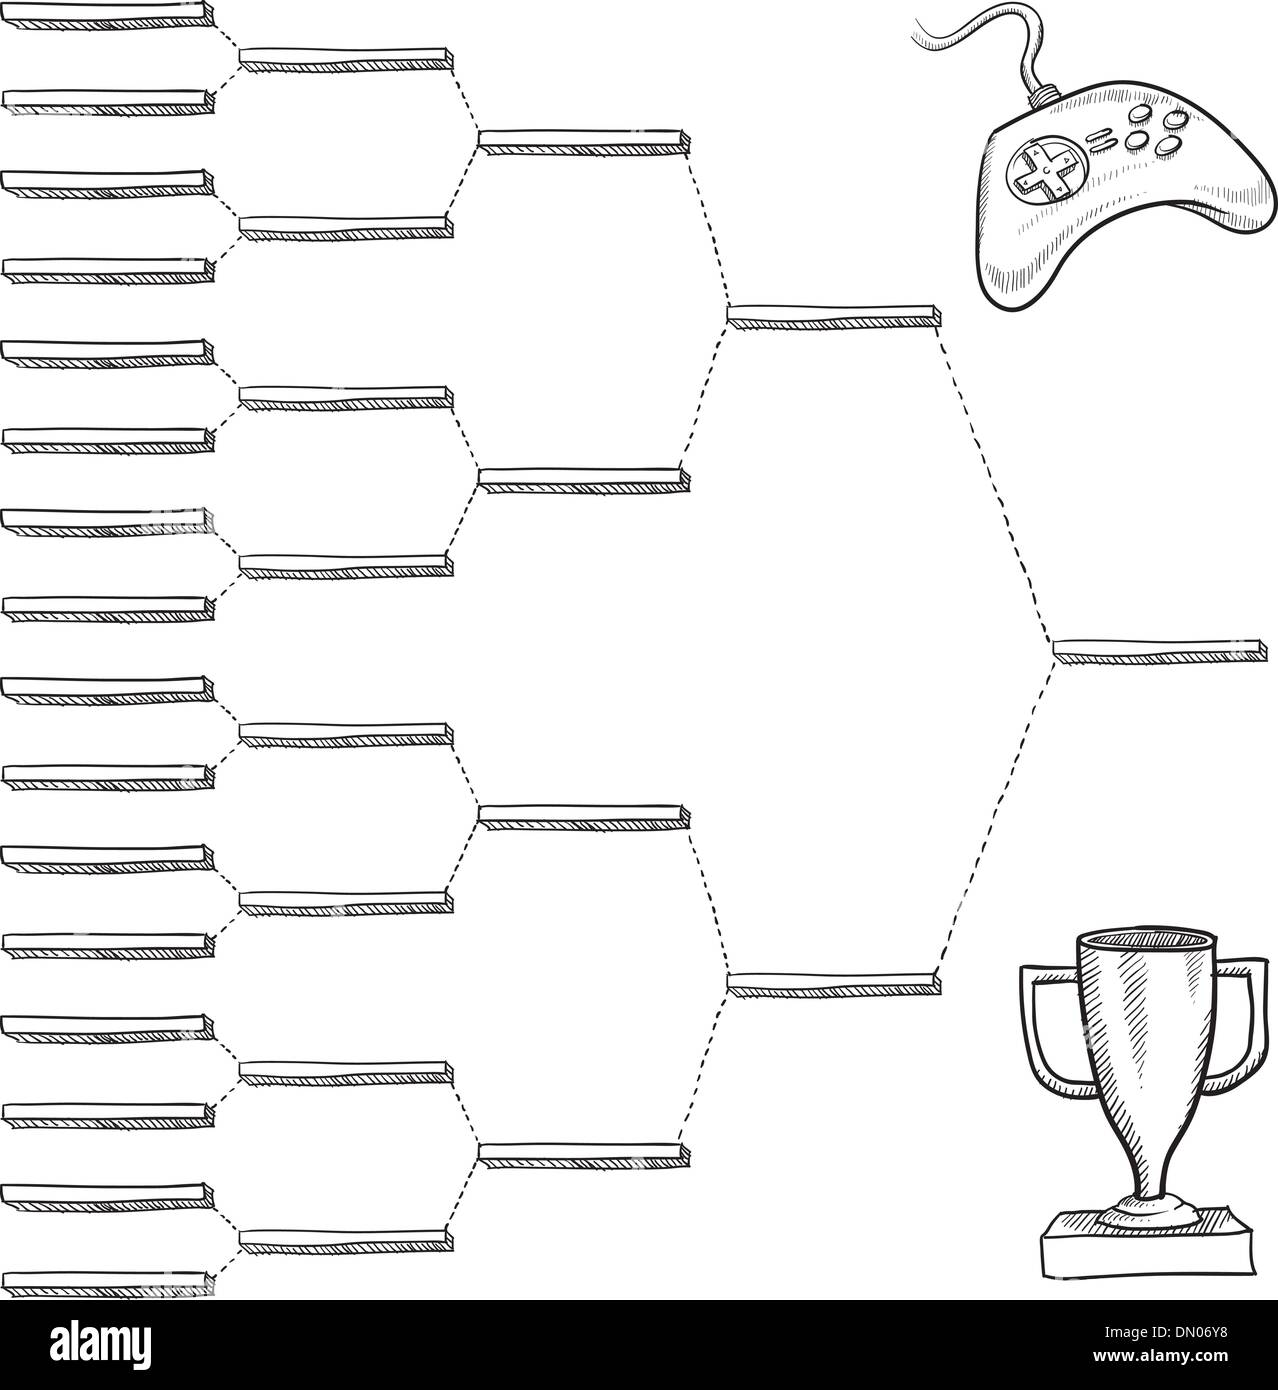 Video game contest playoff bracket Stock Vector